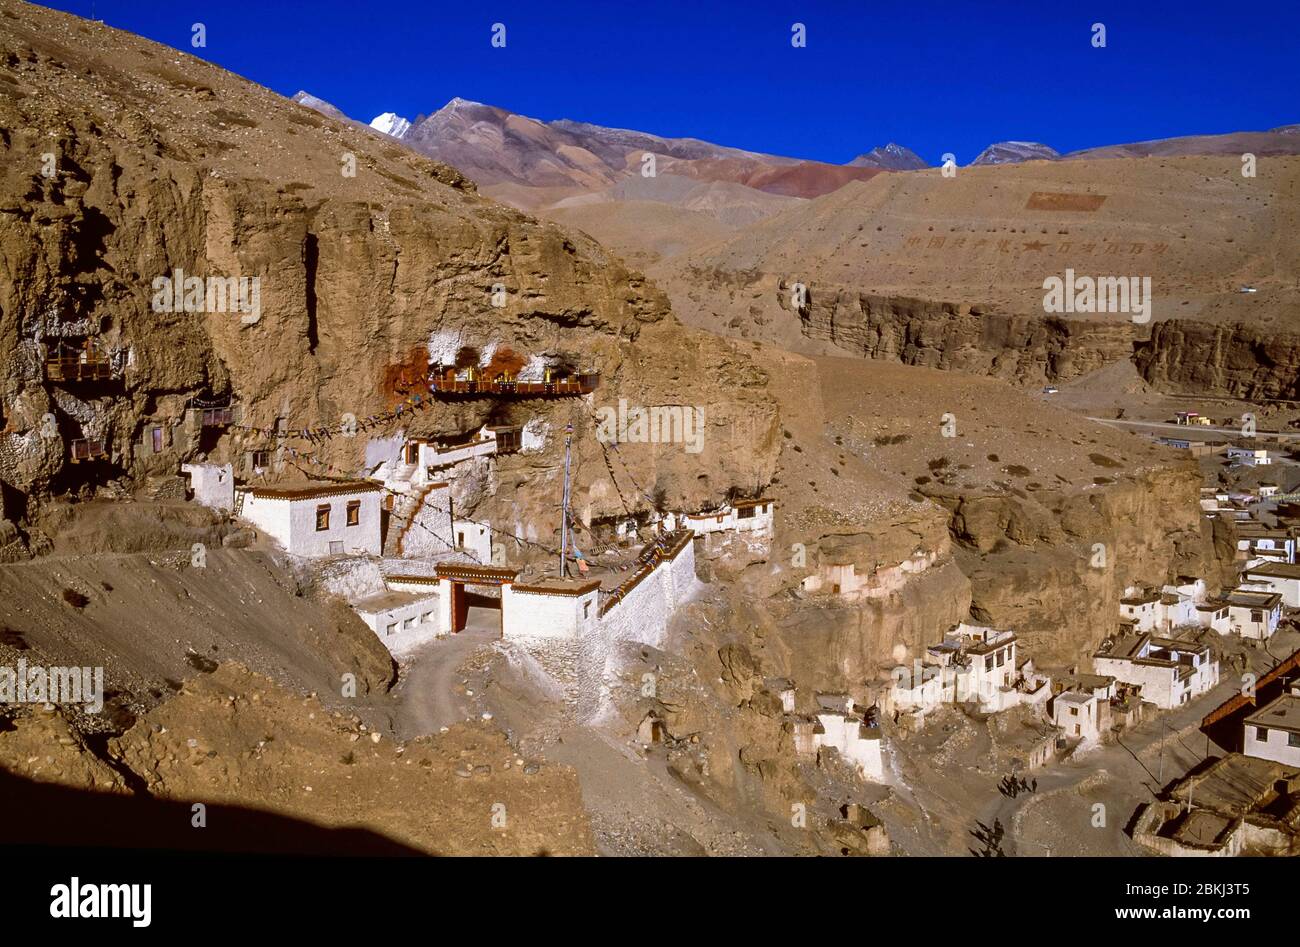 China, western Tibet, Ngari province, Ali Shiquane, Kingdoms of Guge, Zhanzhung culture, Purang or Taklakot, Tsegu rock monastery, literally the nine-story temple, dominating the cave dwellings of the ancient caravan city at the crossroads of trade routes between Tibet, China, India and Nepal Stock Photo